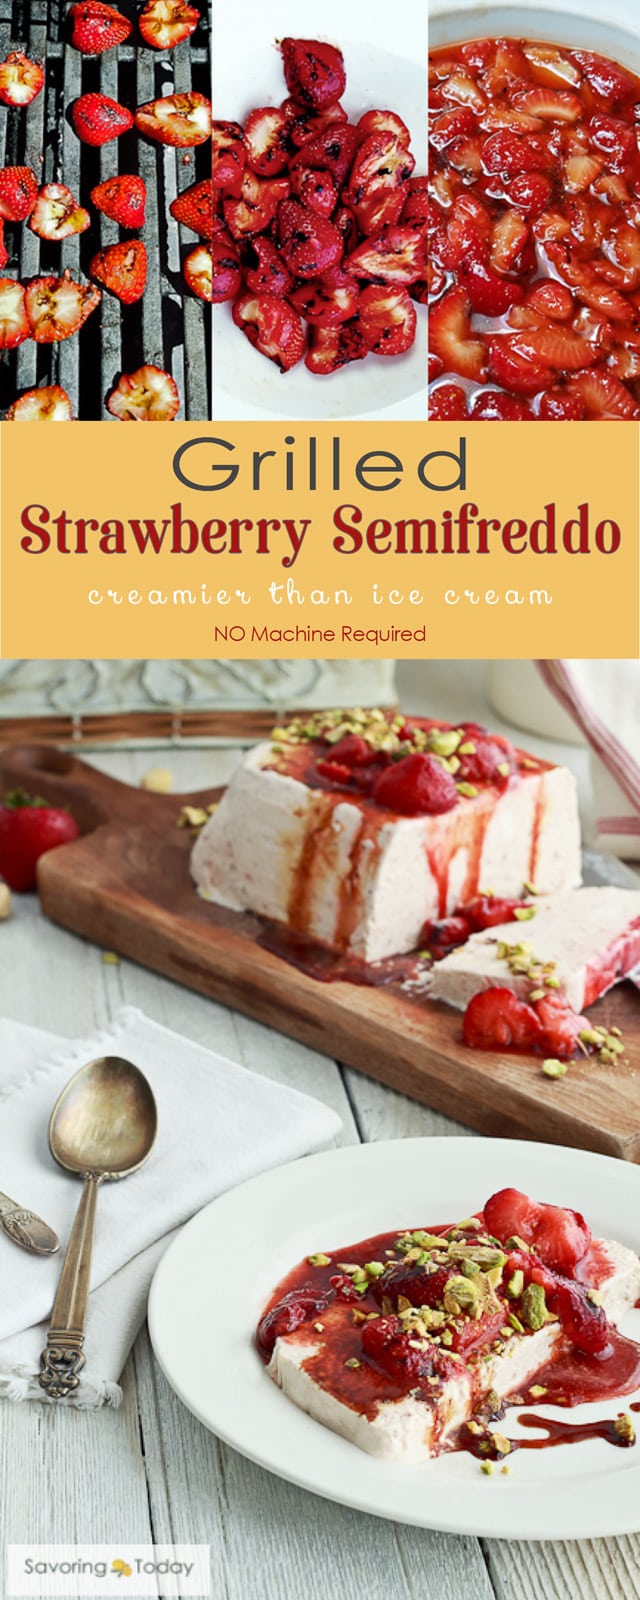 Grilled Strawberry Semifreddo with Pistachios & Balsamic